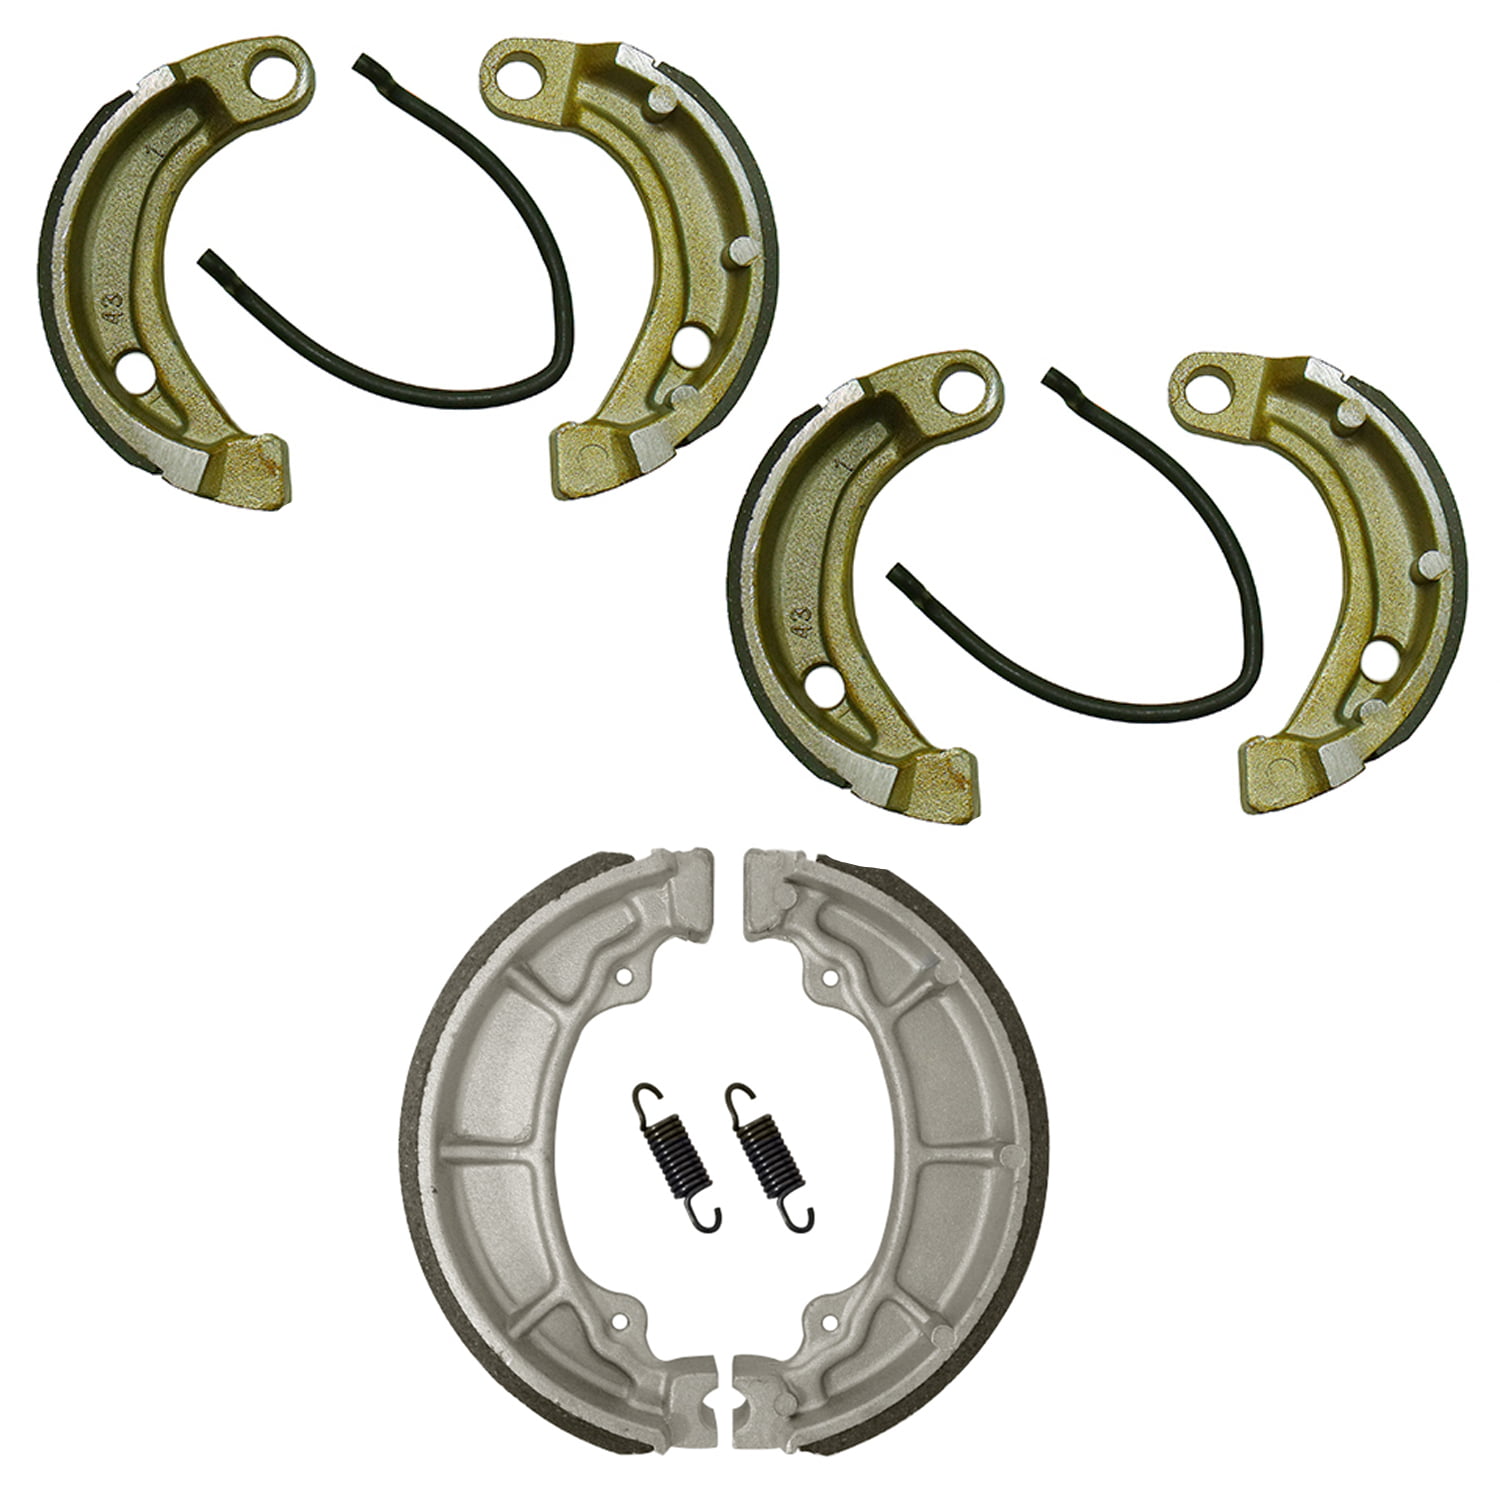 Caltric Front And Rear Brake Shoes Compatible with Polaris Predator 90 2003 2004 2005 2006 